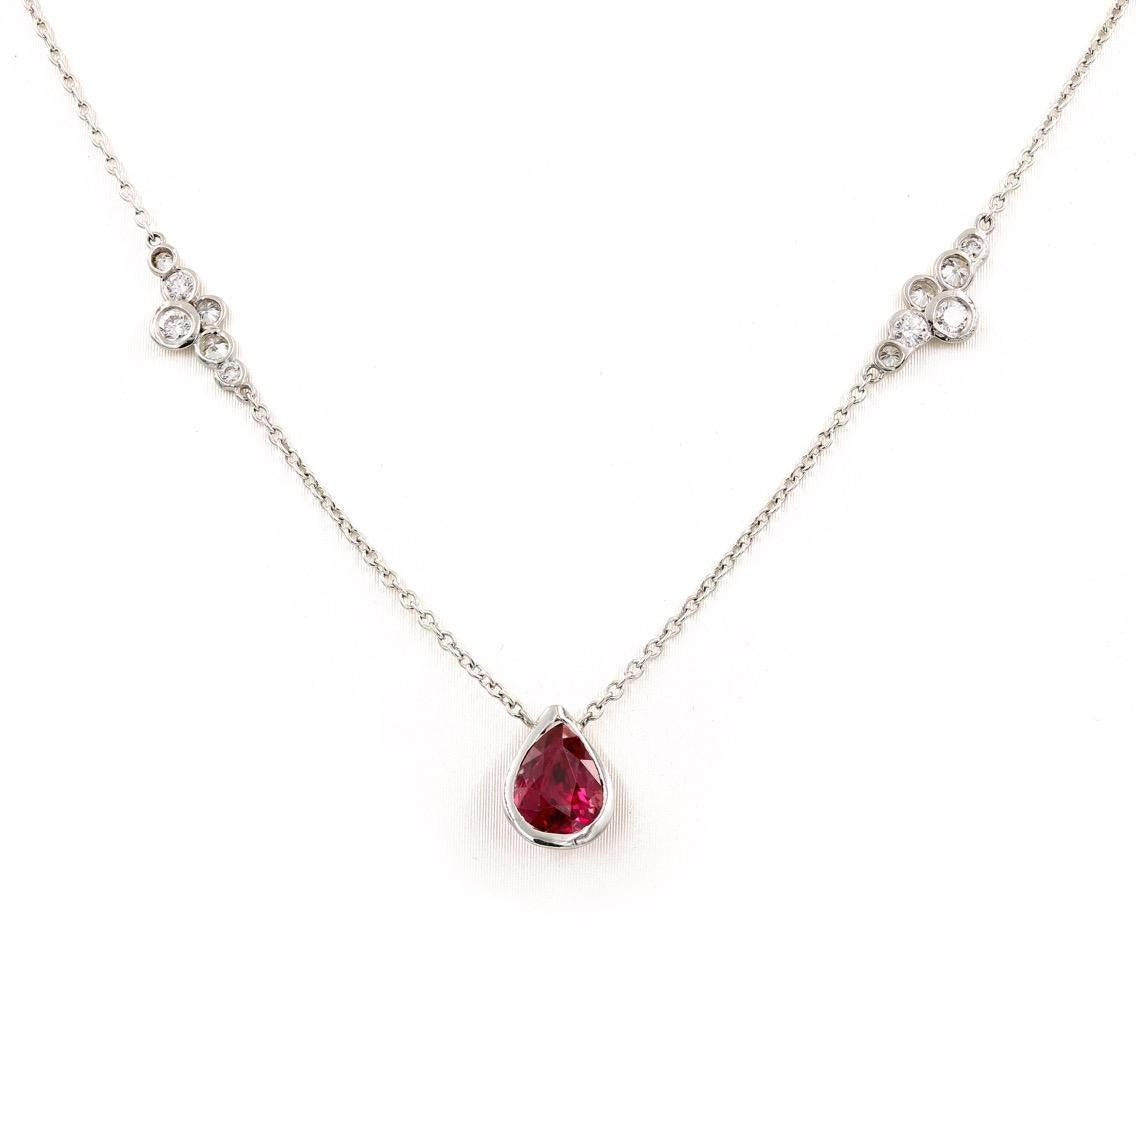 Contemporary Lester Lampert Original Pirouette Diamond Necklace with Pear Shape Ruby Center